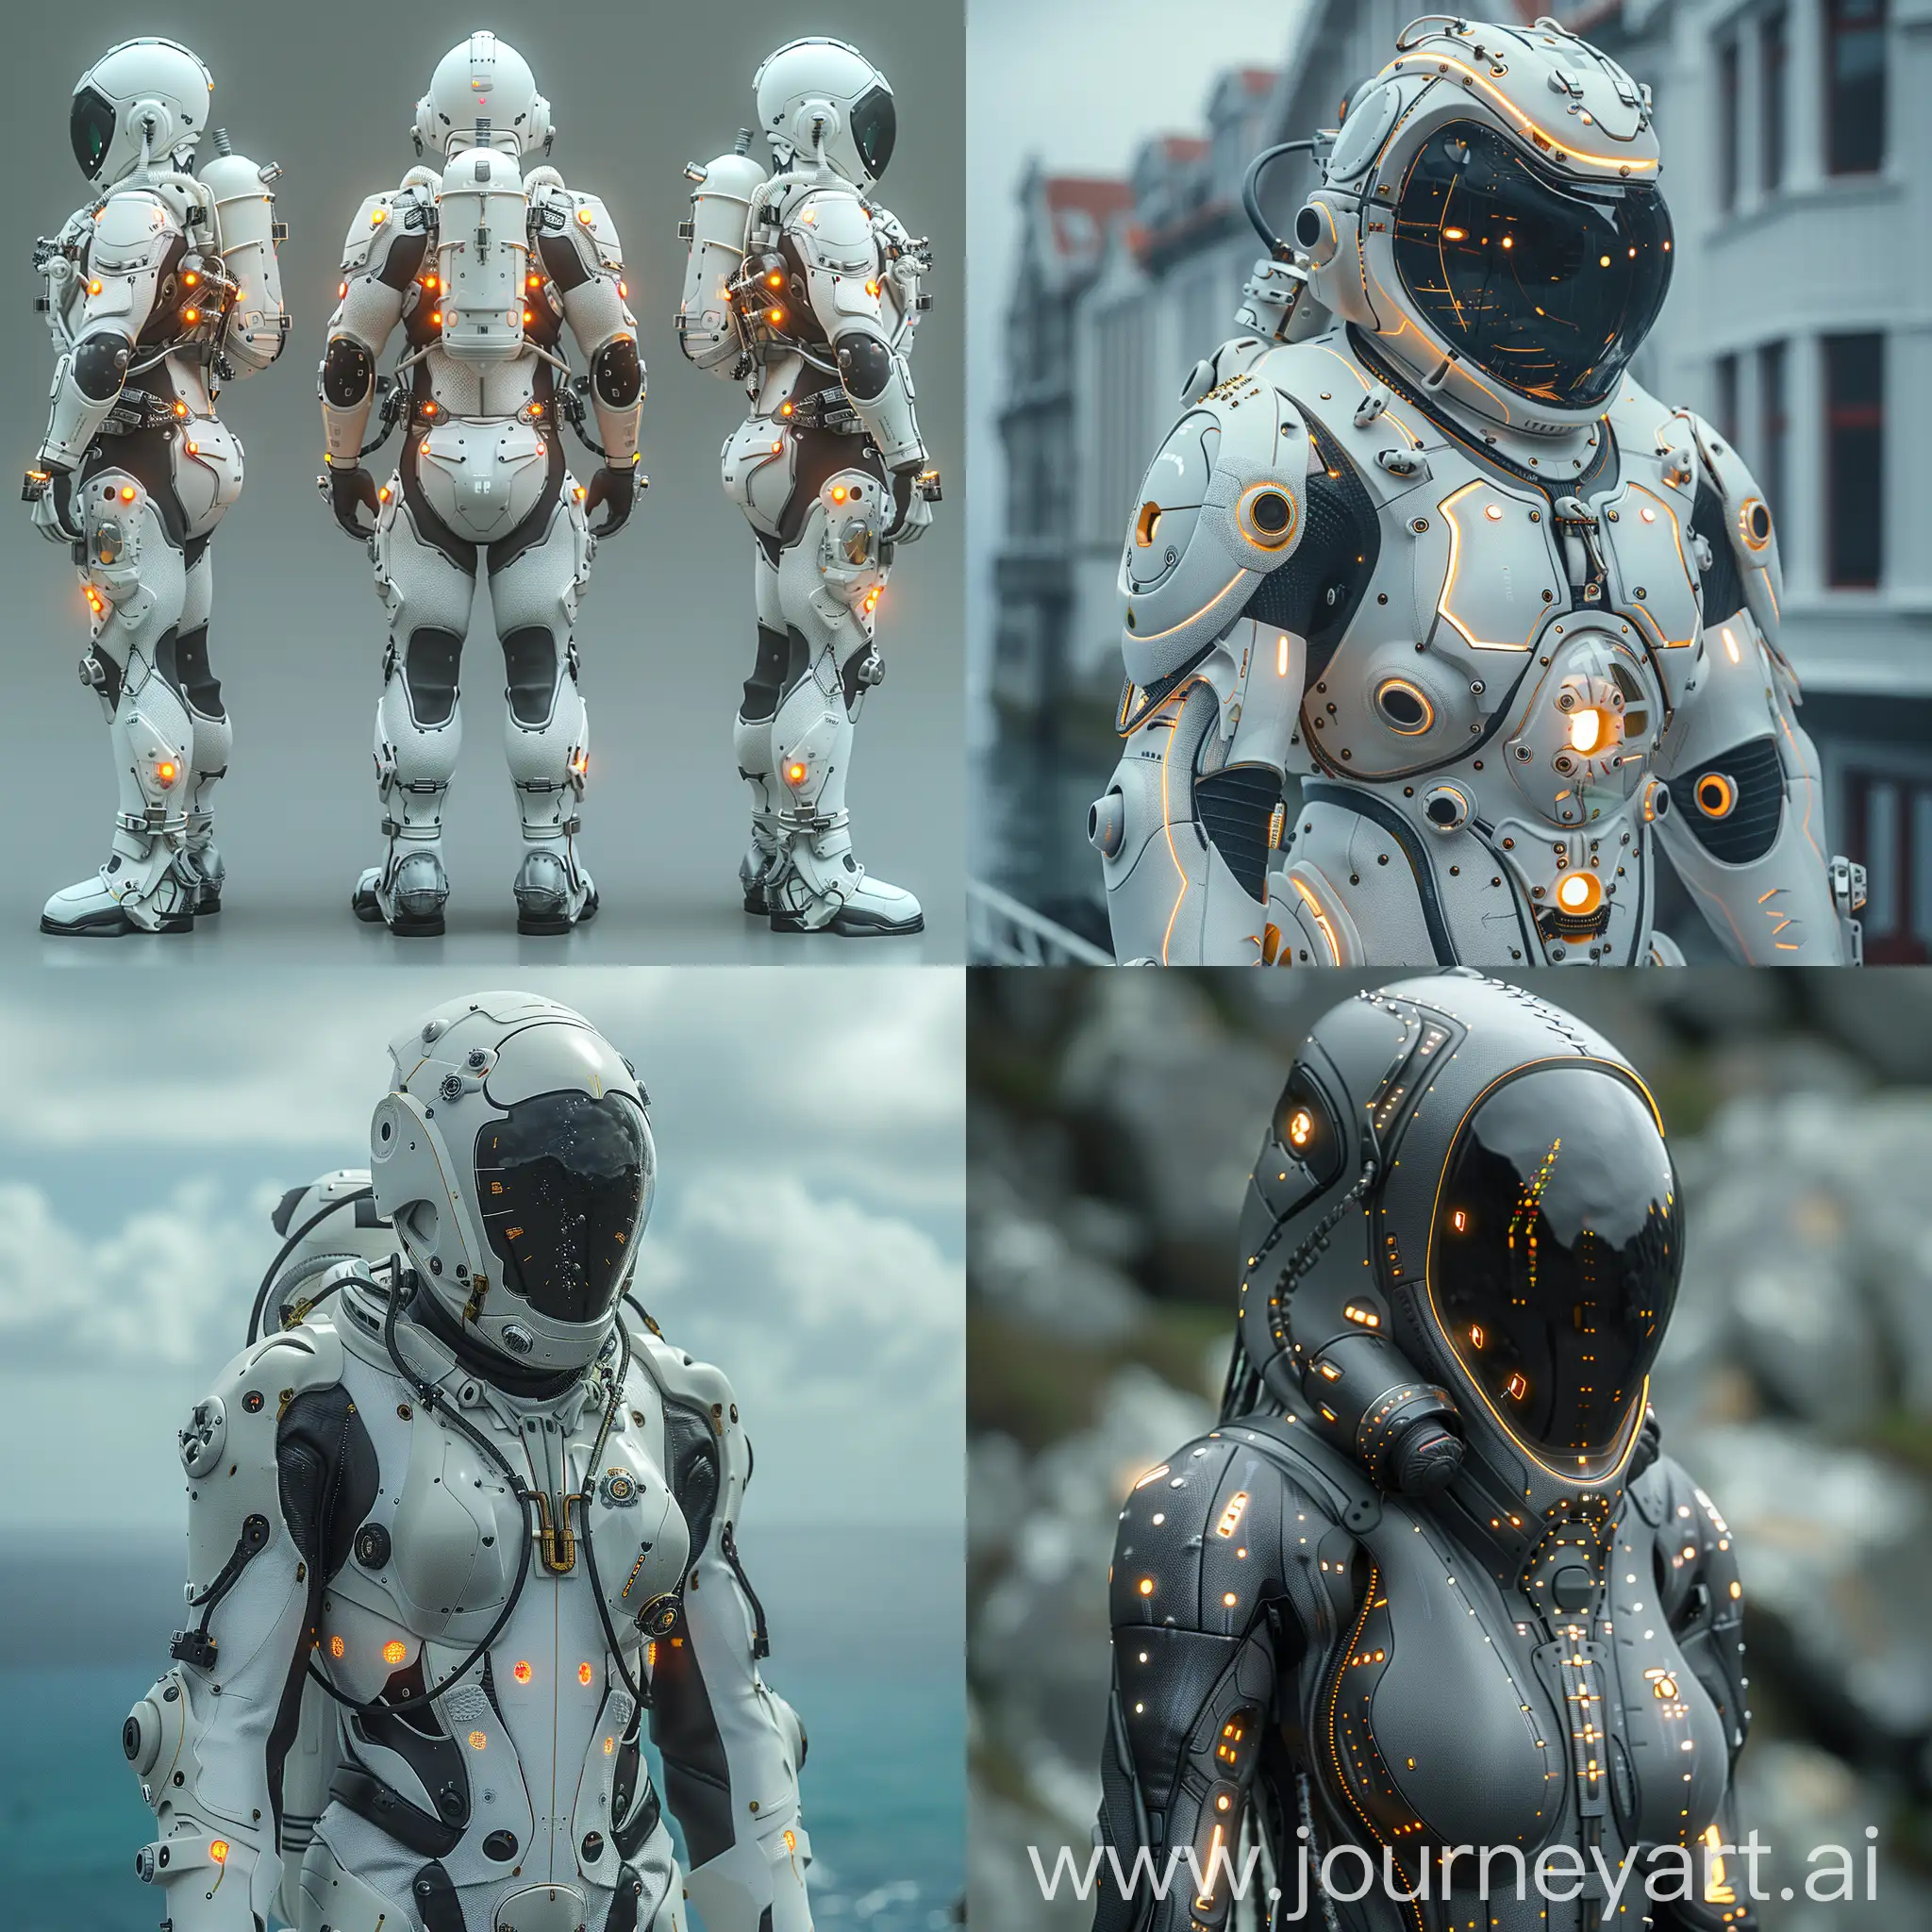 Futuristic diver's costume, high tech, The Suit, Biomimetic Design, Integrated Environmental Controls, Self-Luminous Panels, The Helmet, Augmented Reality Visor, Enhanced Communication, 360-degree Awareness, Additional Gear, Modular Tool Arms, Underwater Propulsion Systems, octane render --stylize 1000